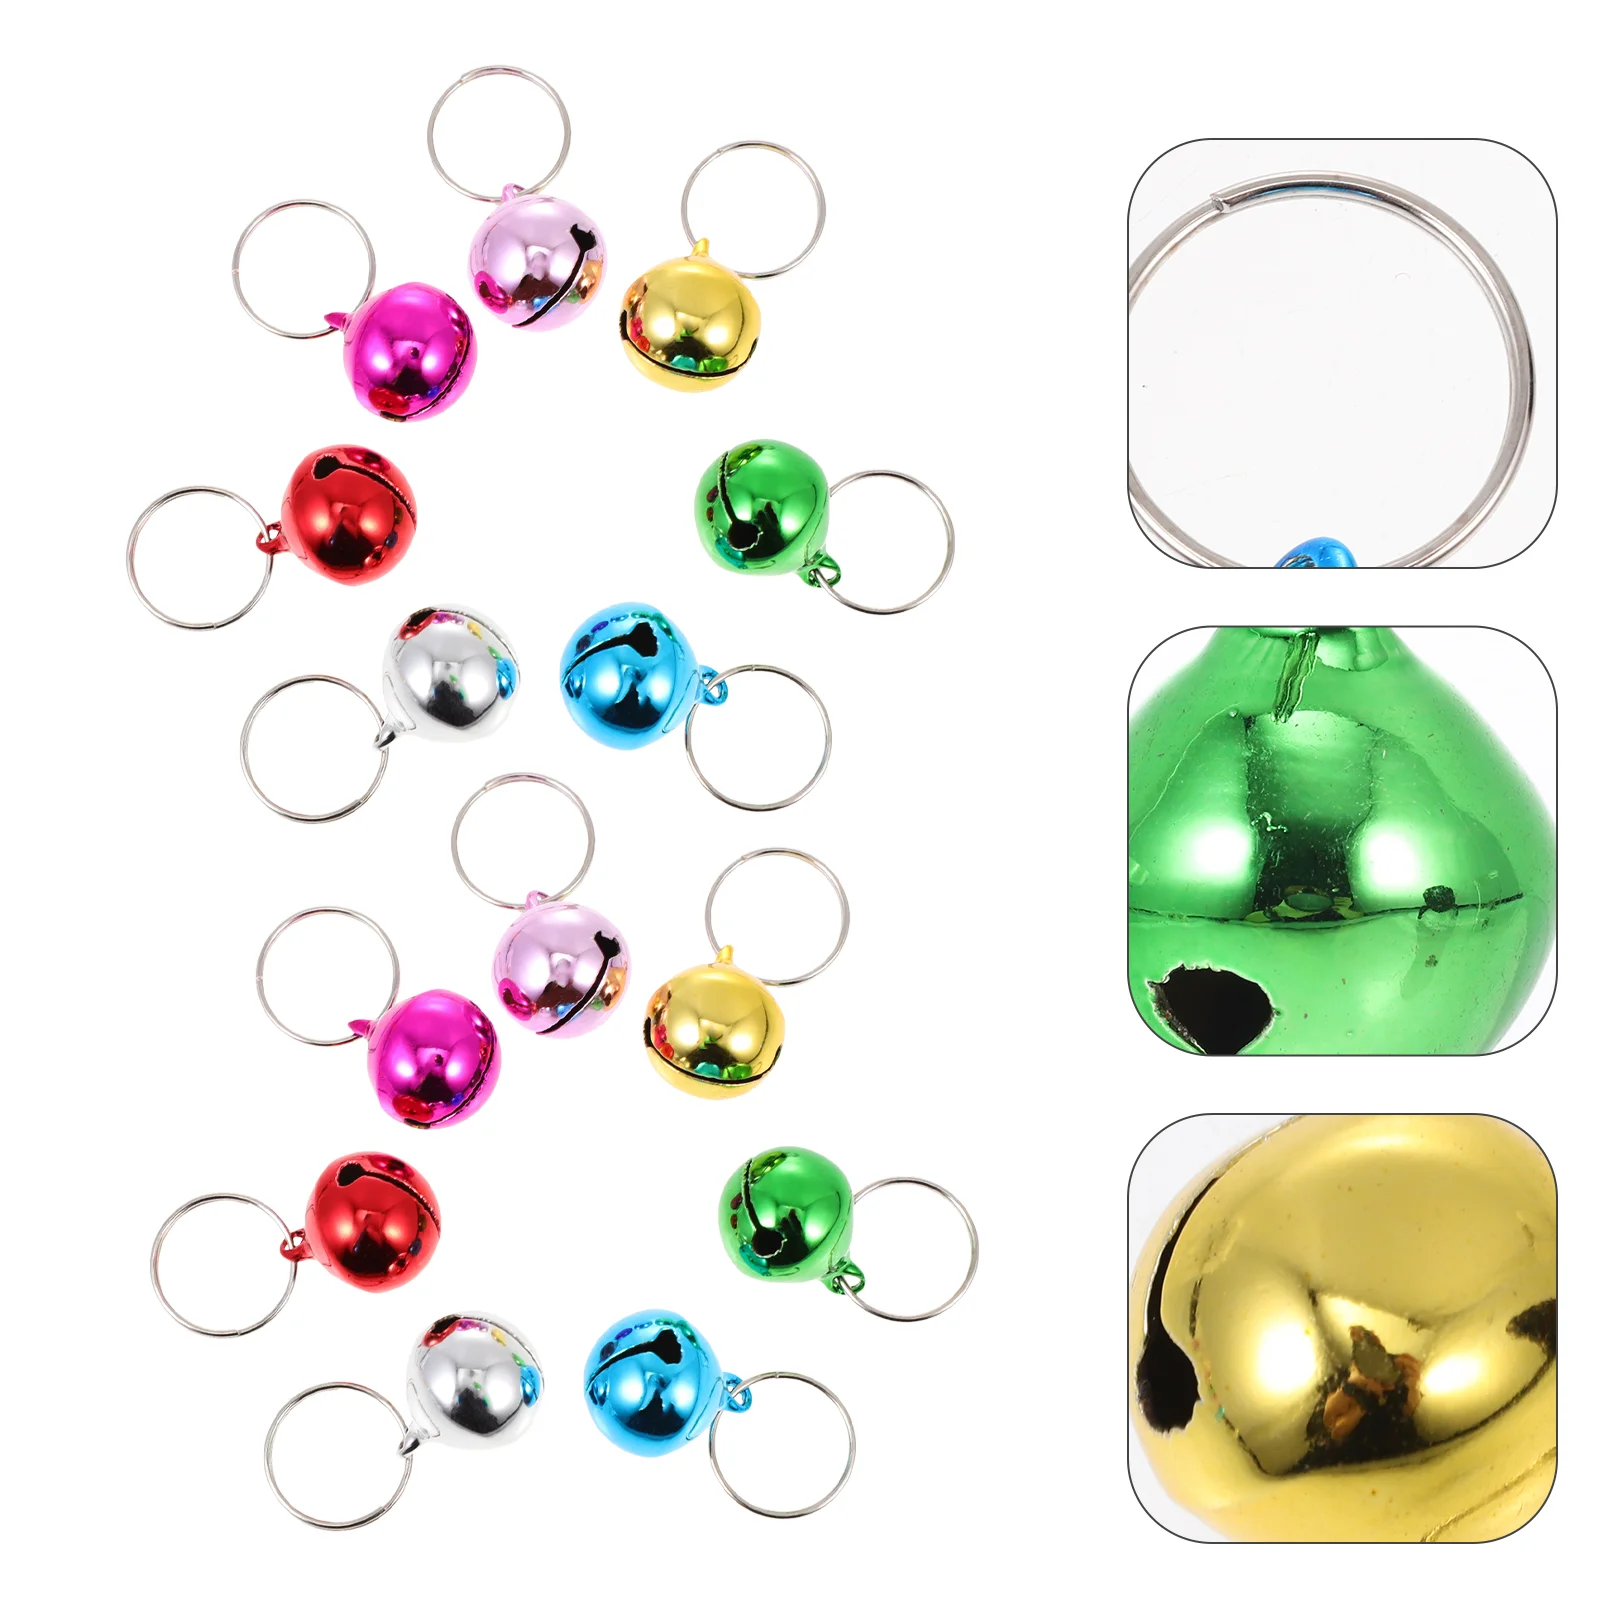 

24 Pcs Pet Bell Accessories Multi-function Bells Dog Accessory Colored Puppy Collars Adorable Kitten Replaceable The Cat Pets